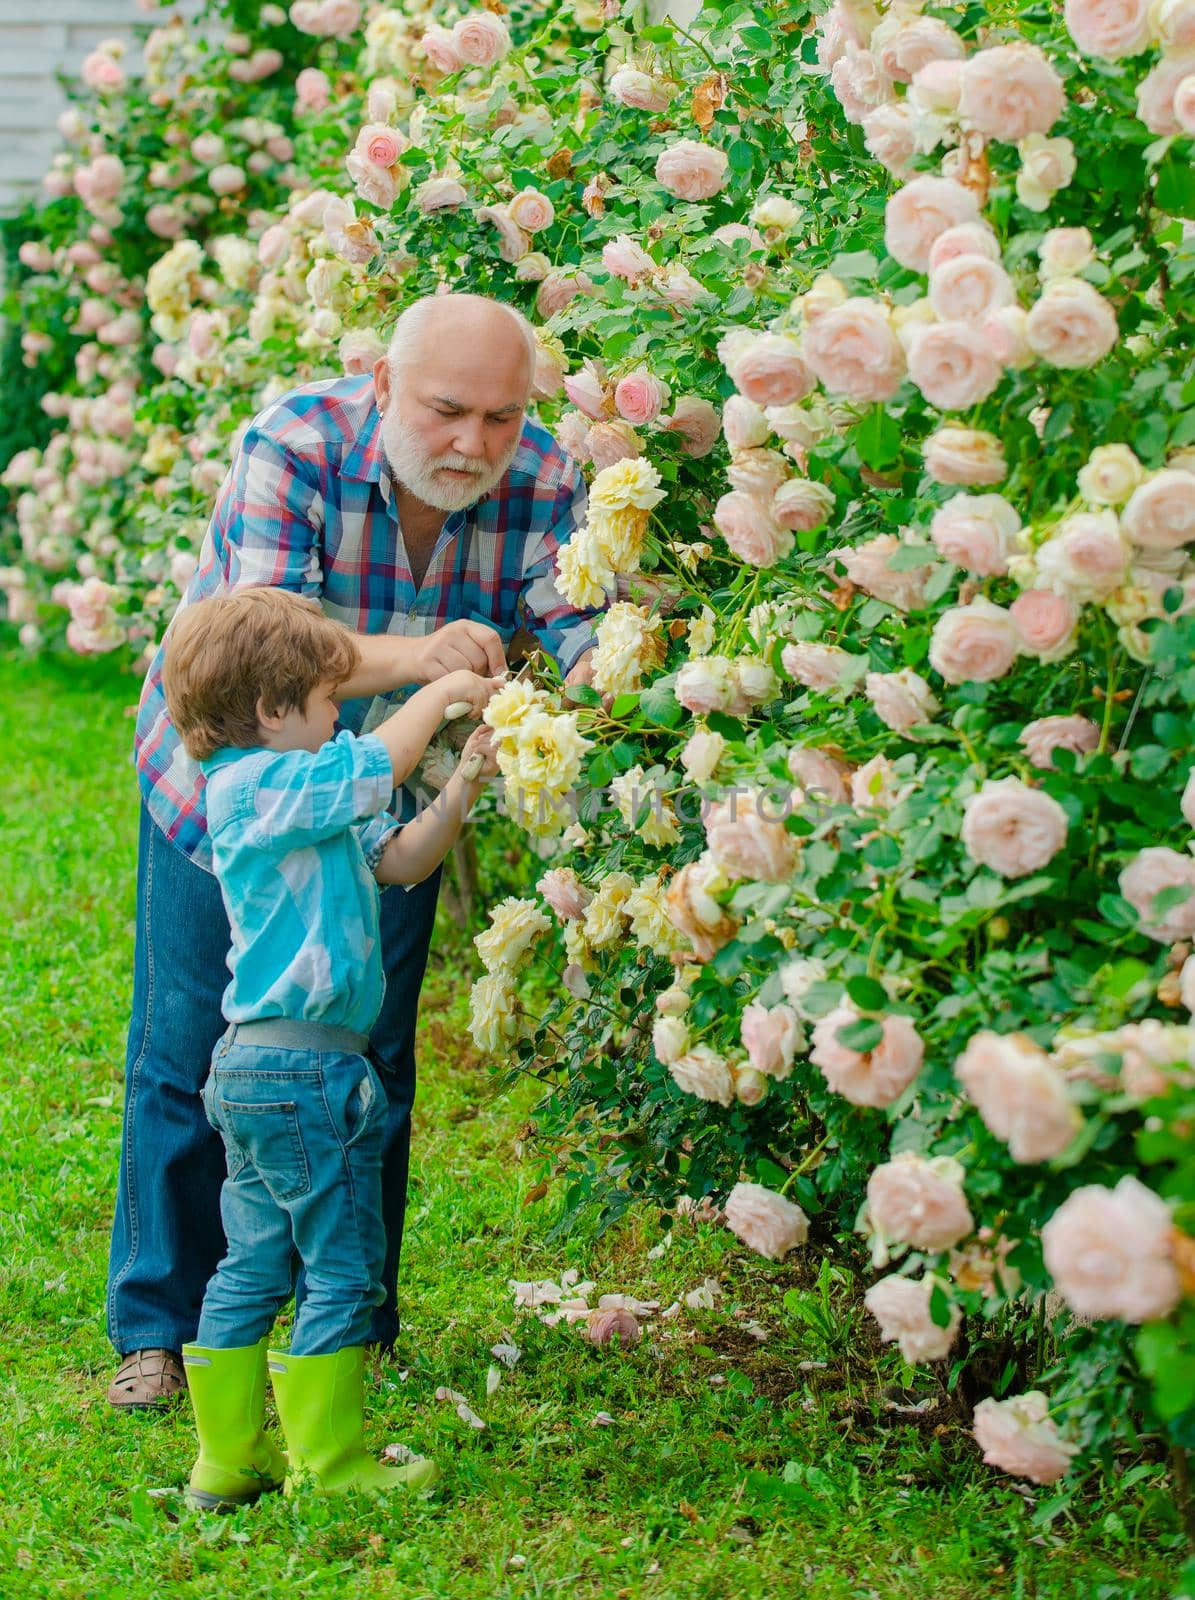 Gardener cutting flowers in his garden. A grandfather and a toddler are working in flowers park. Father and son grows flowers together. Family generation and relations concept. Farm family. by Tverdokhlib